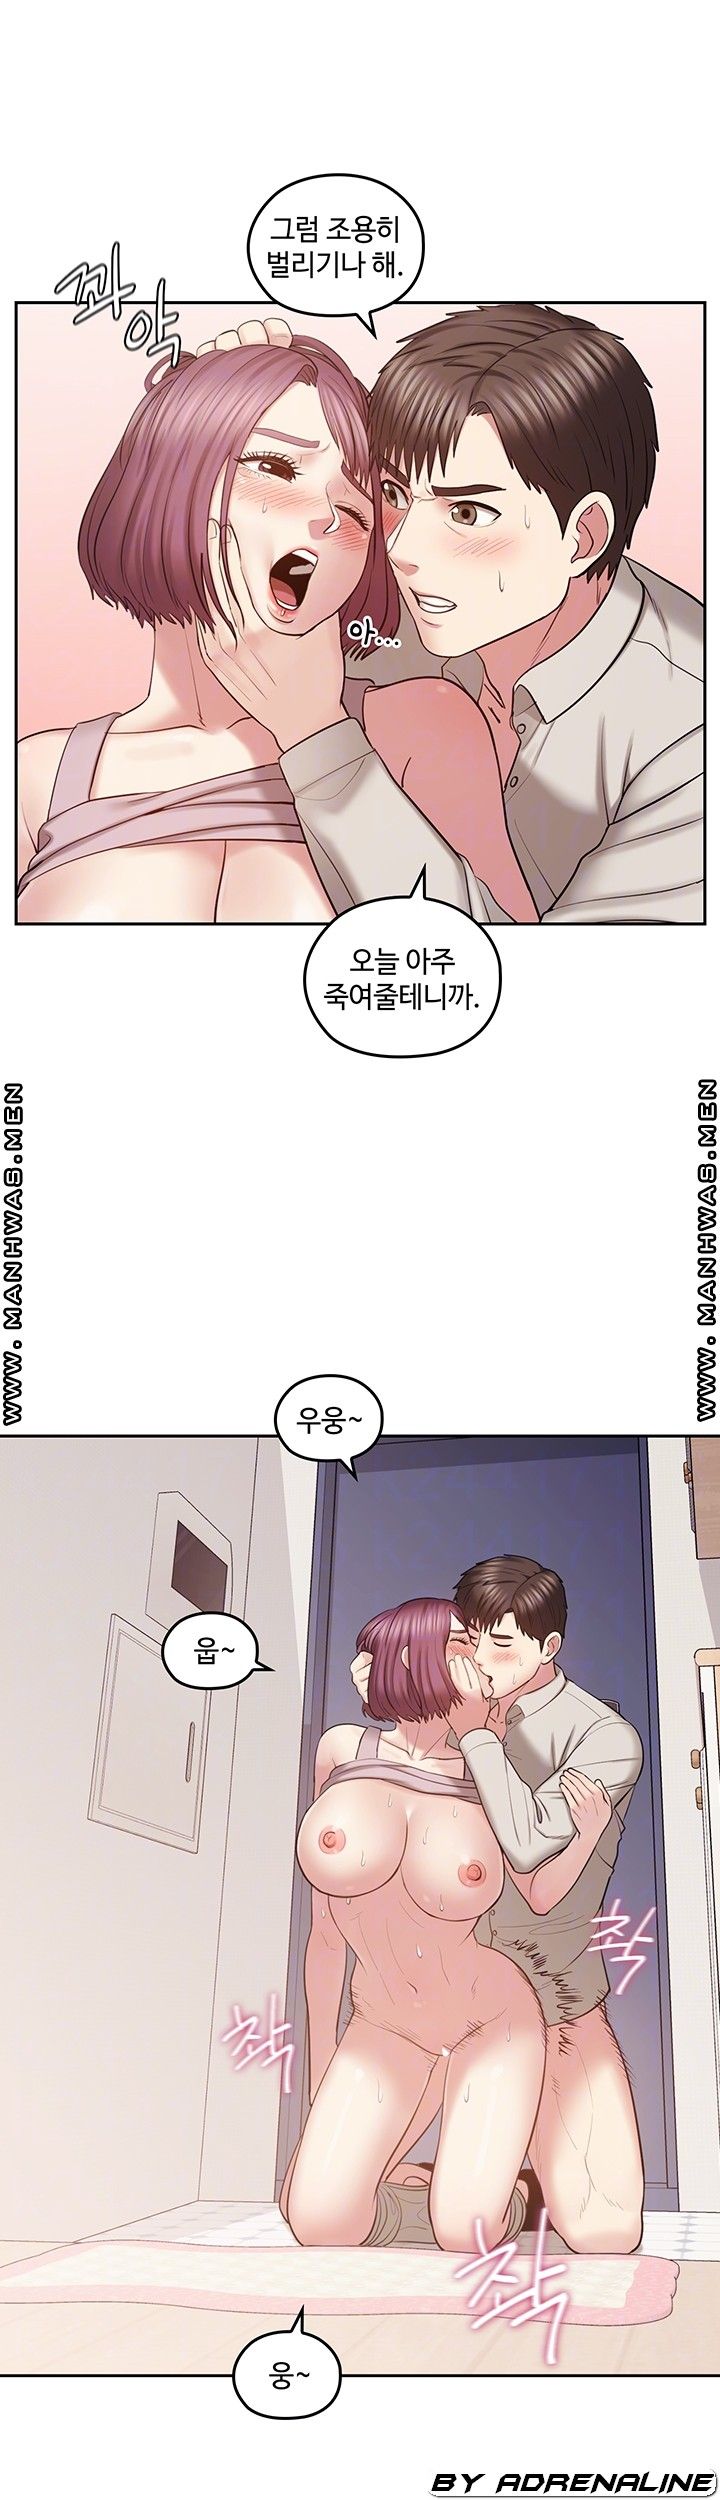 Sok Gung Hap Consulting Raw - Chapter 3 Page 9